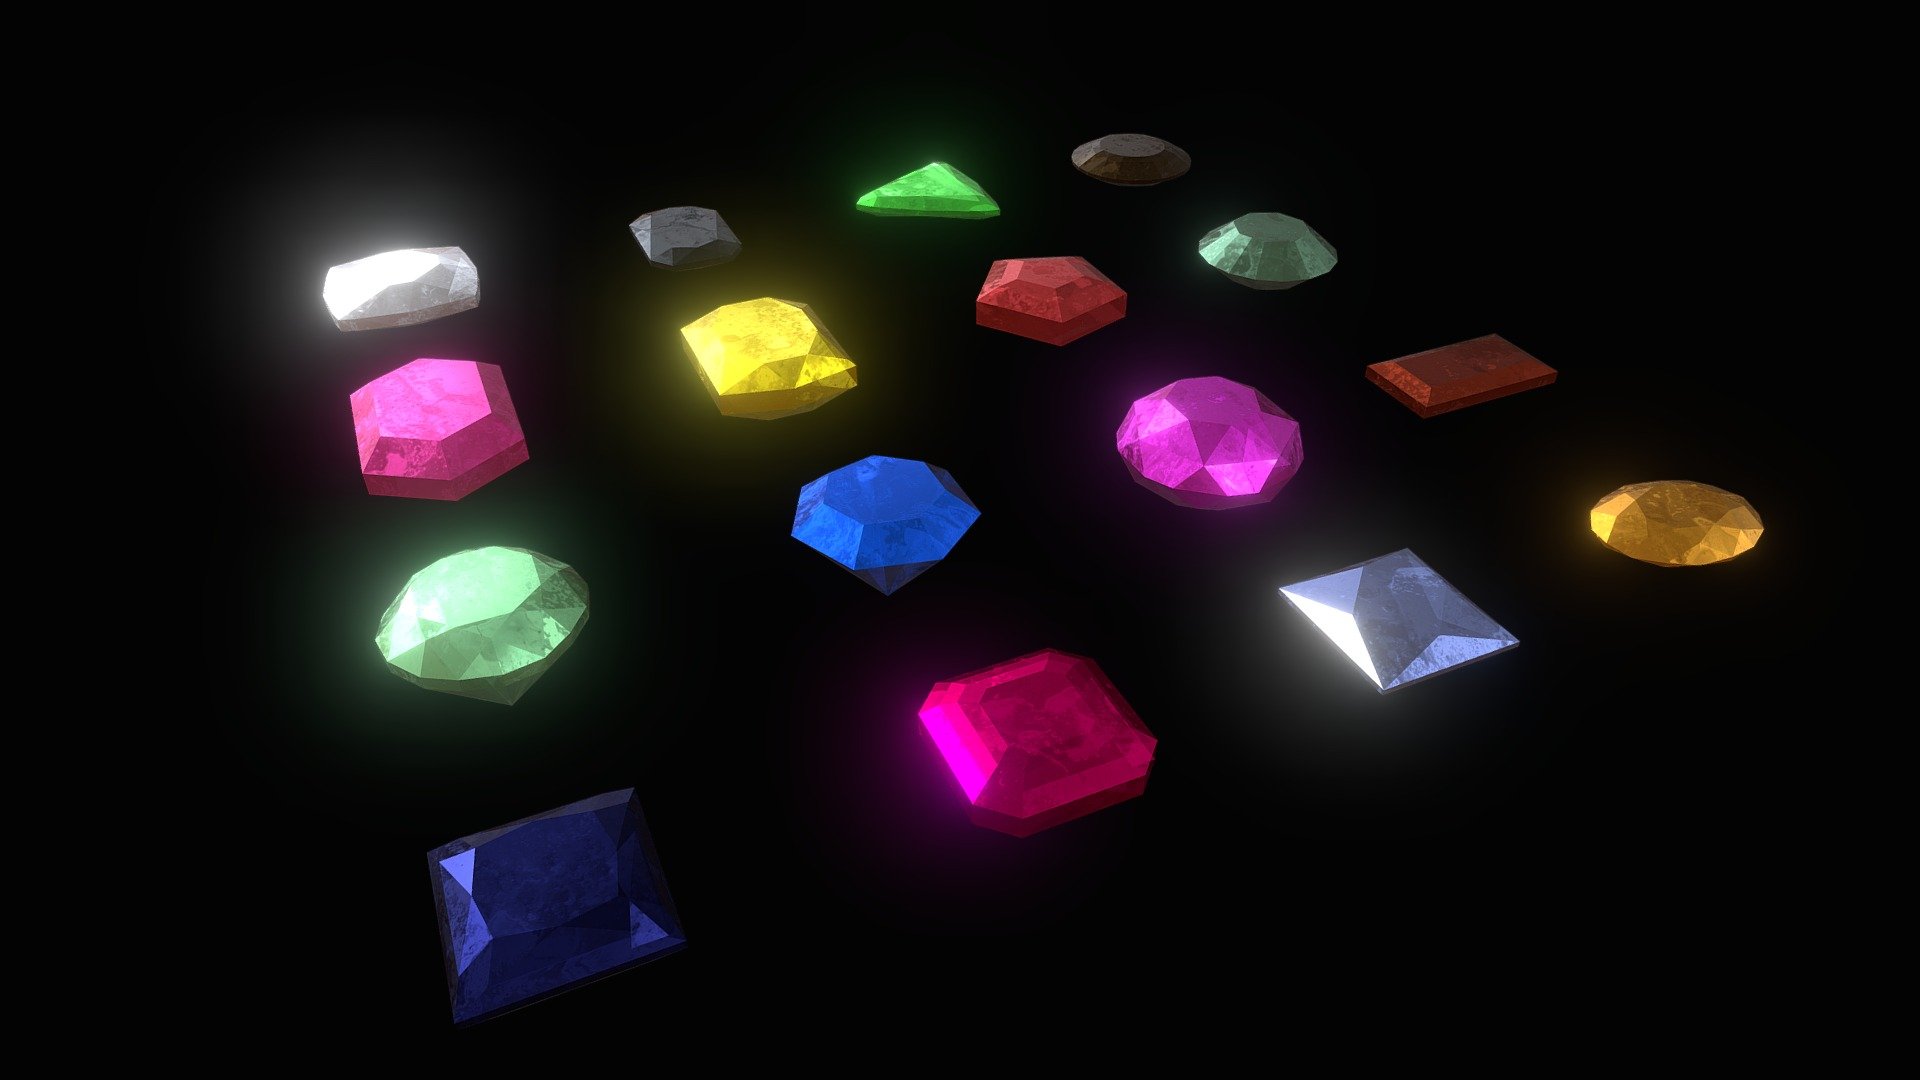 Lowpoly precious stones. Textured, one shared material.

Includes gem shapes also from my other asset: https://skfb.ly/6TMSw

These also included in gem and gold item loot bundle https://skfb.ly/owJUP - Lowpoly gems - Buy Royalty Free 3D model by tamminen 3d model